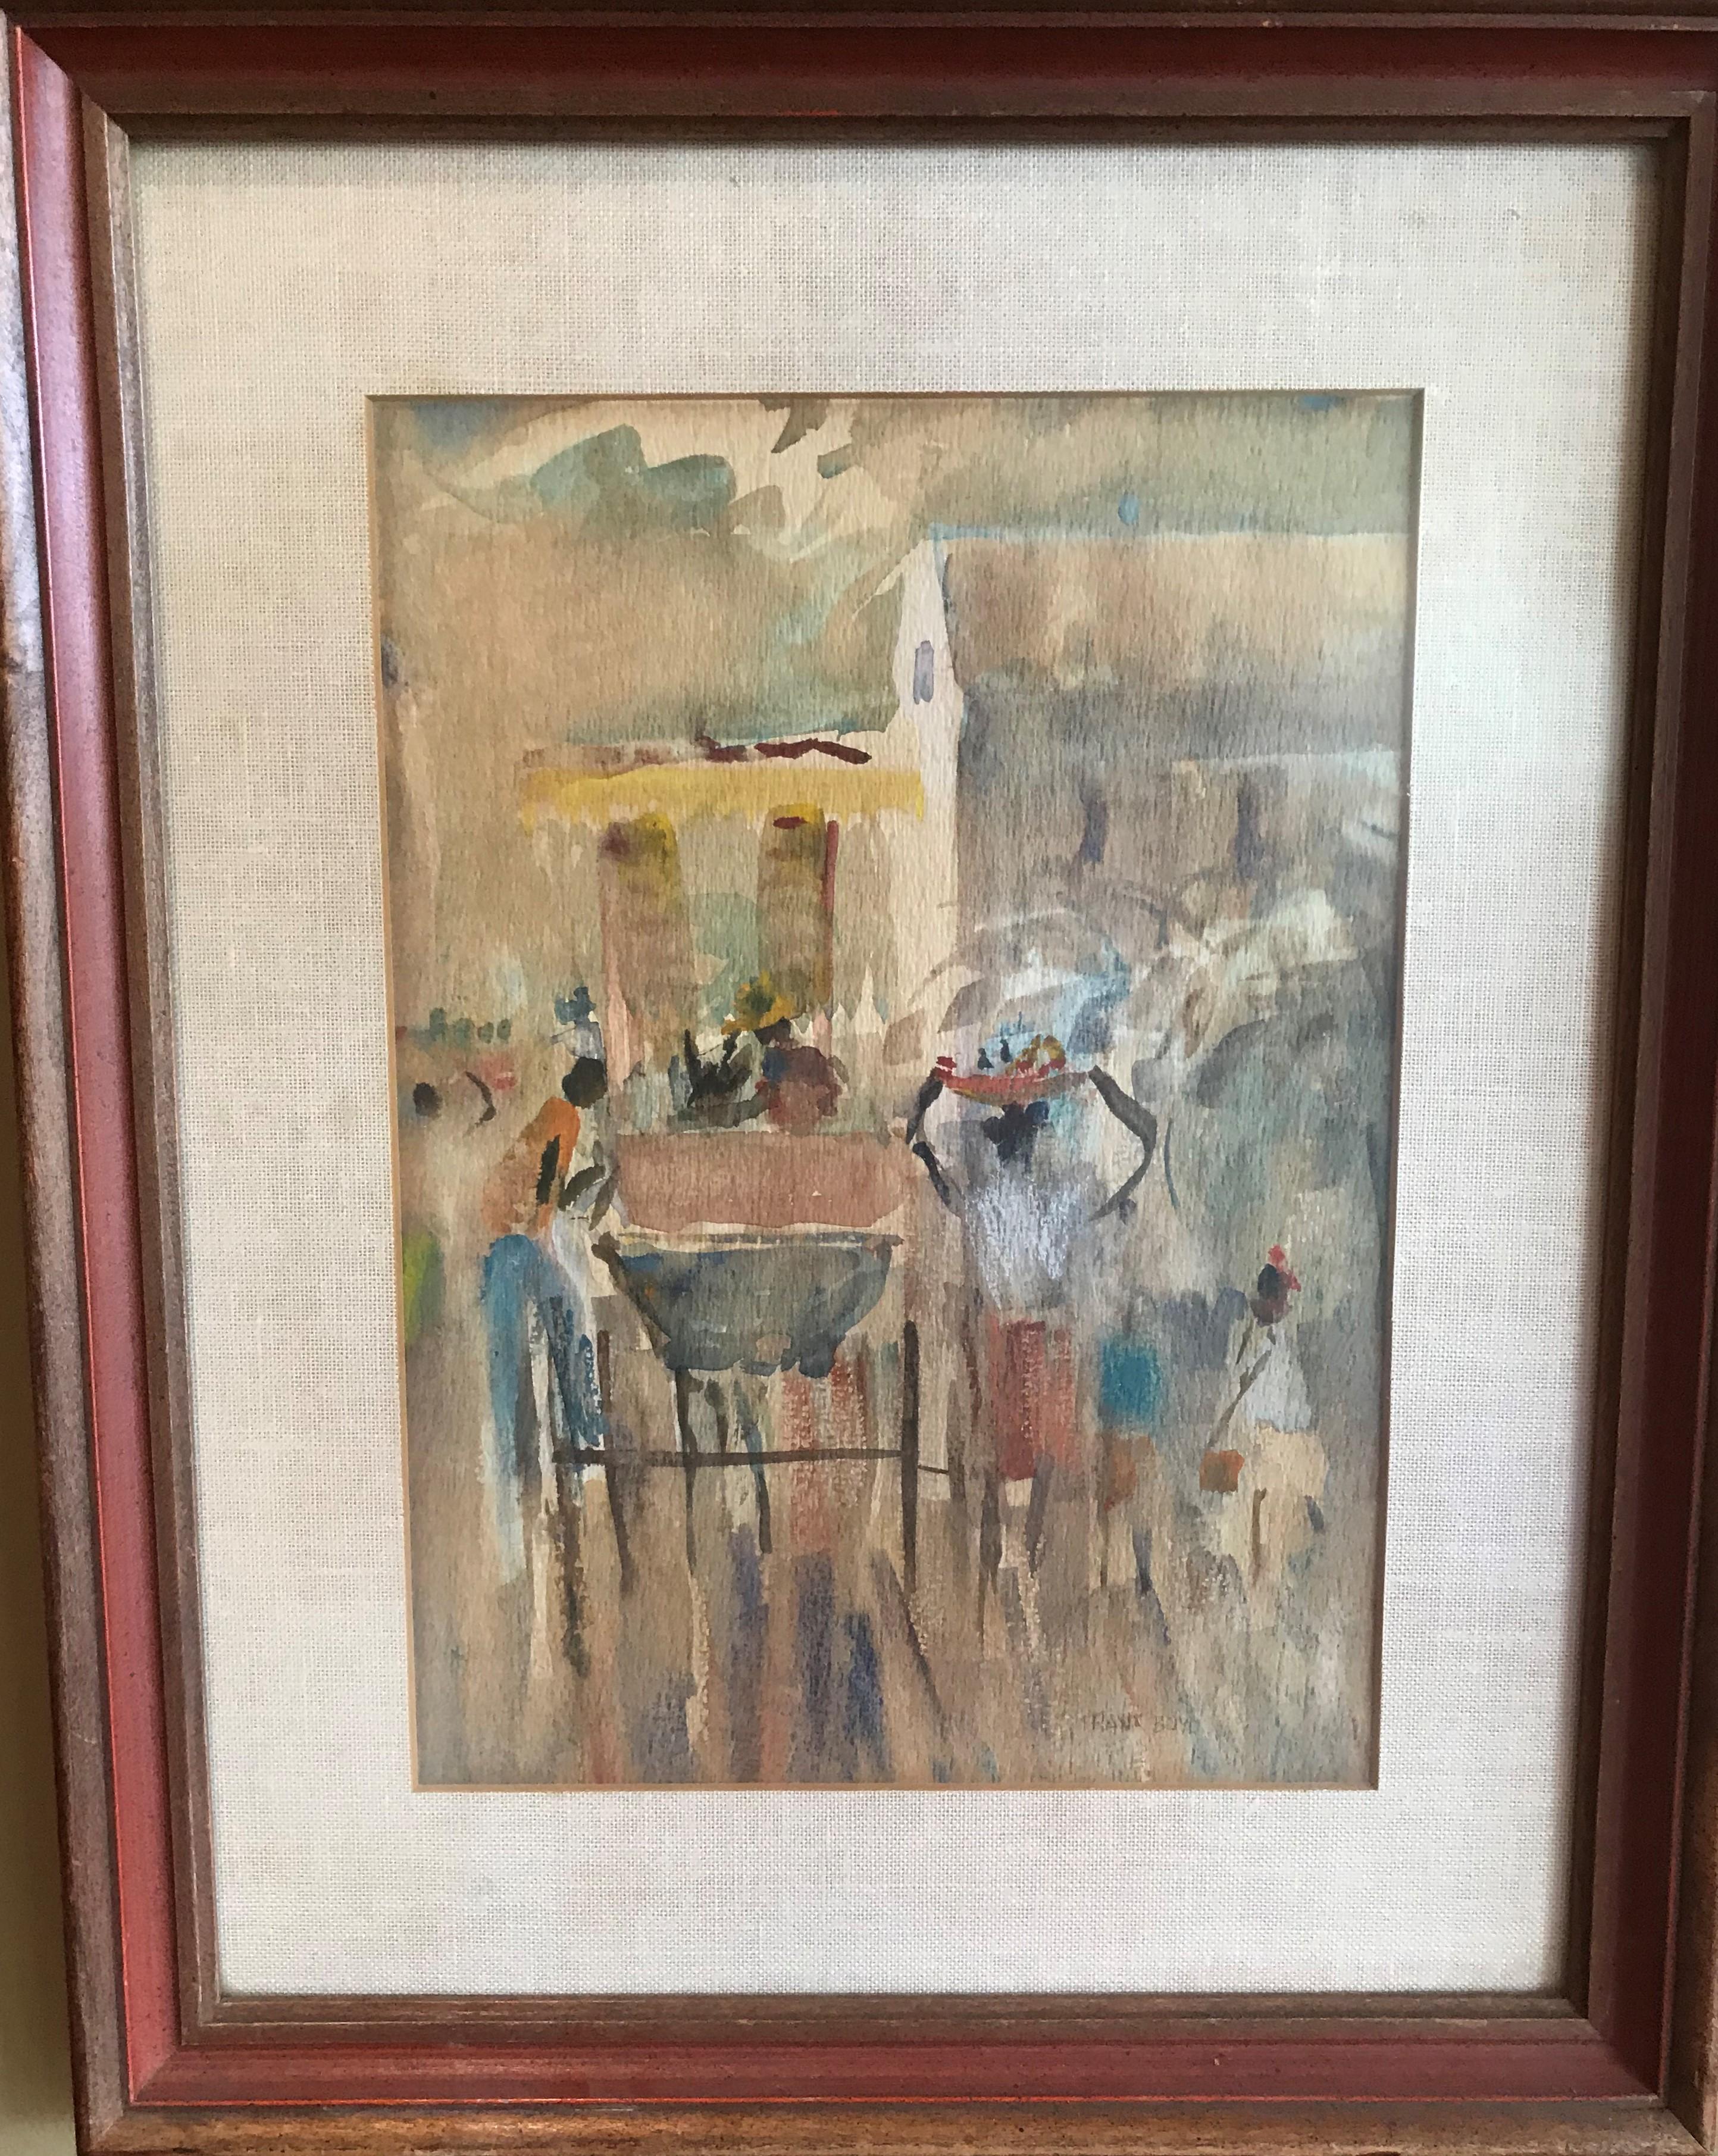 Impressionist 20th century watercolor by Frank Boyd (b. 1893- d. ??). A street scene depicting a carriage with native passerby in soft, colorful mutations. Not much is known about him other that he exhibited in the 9th International Watercolor